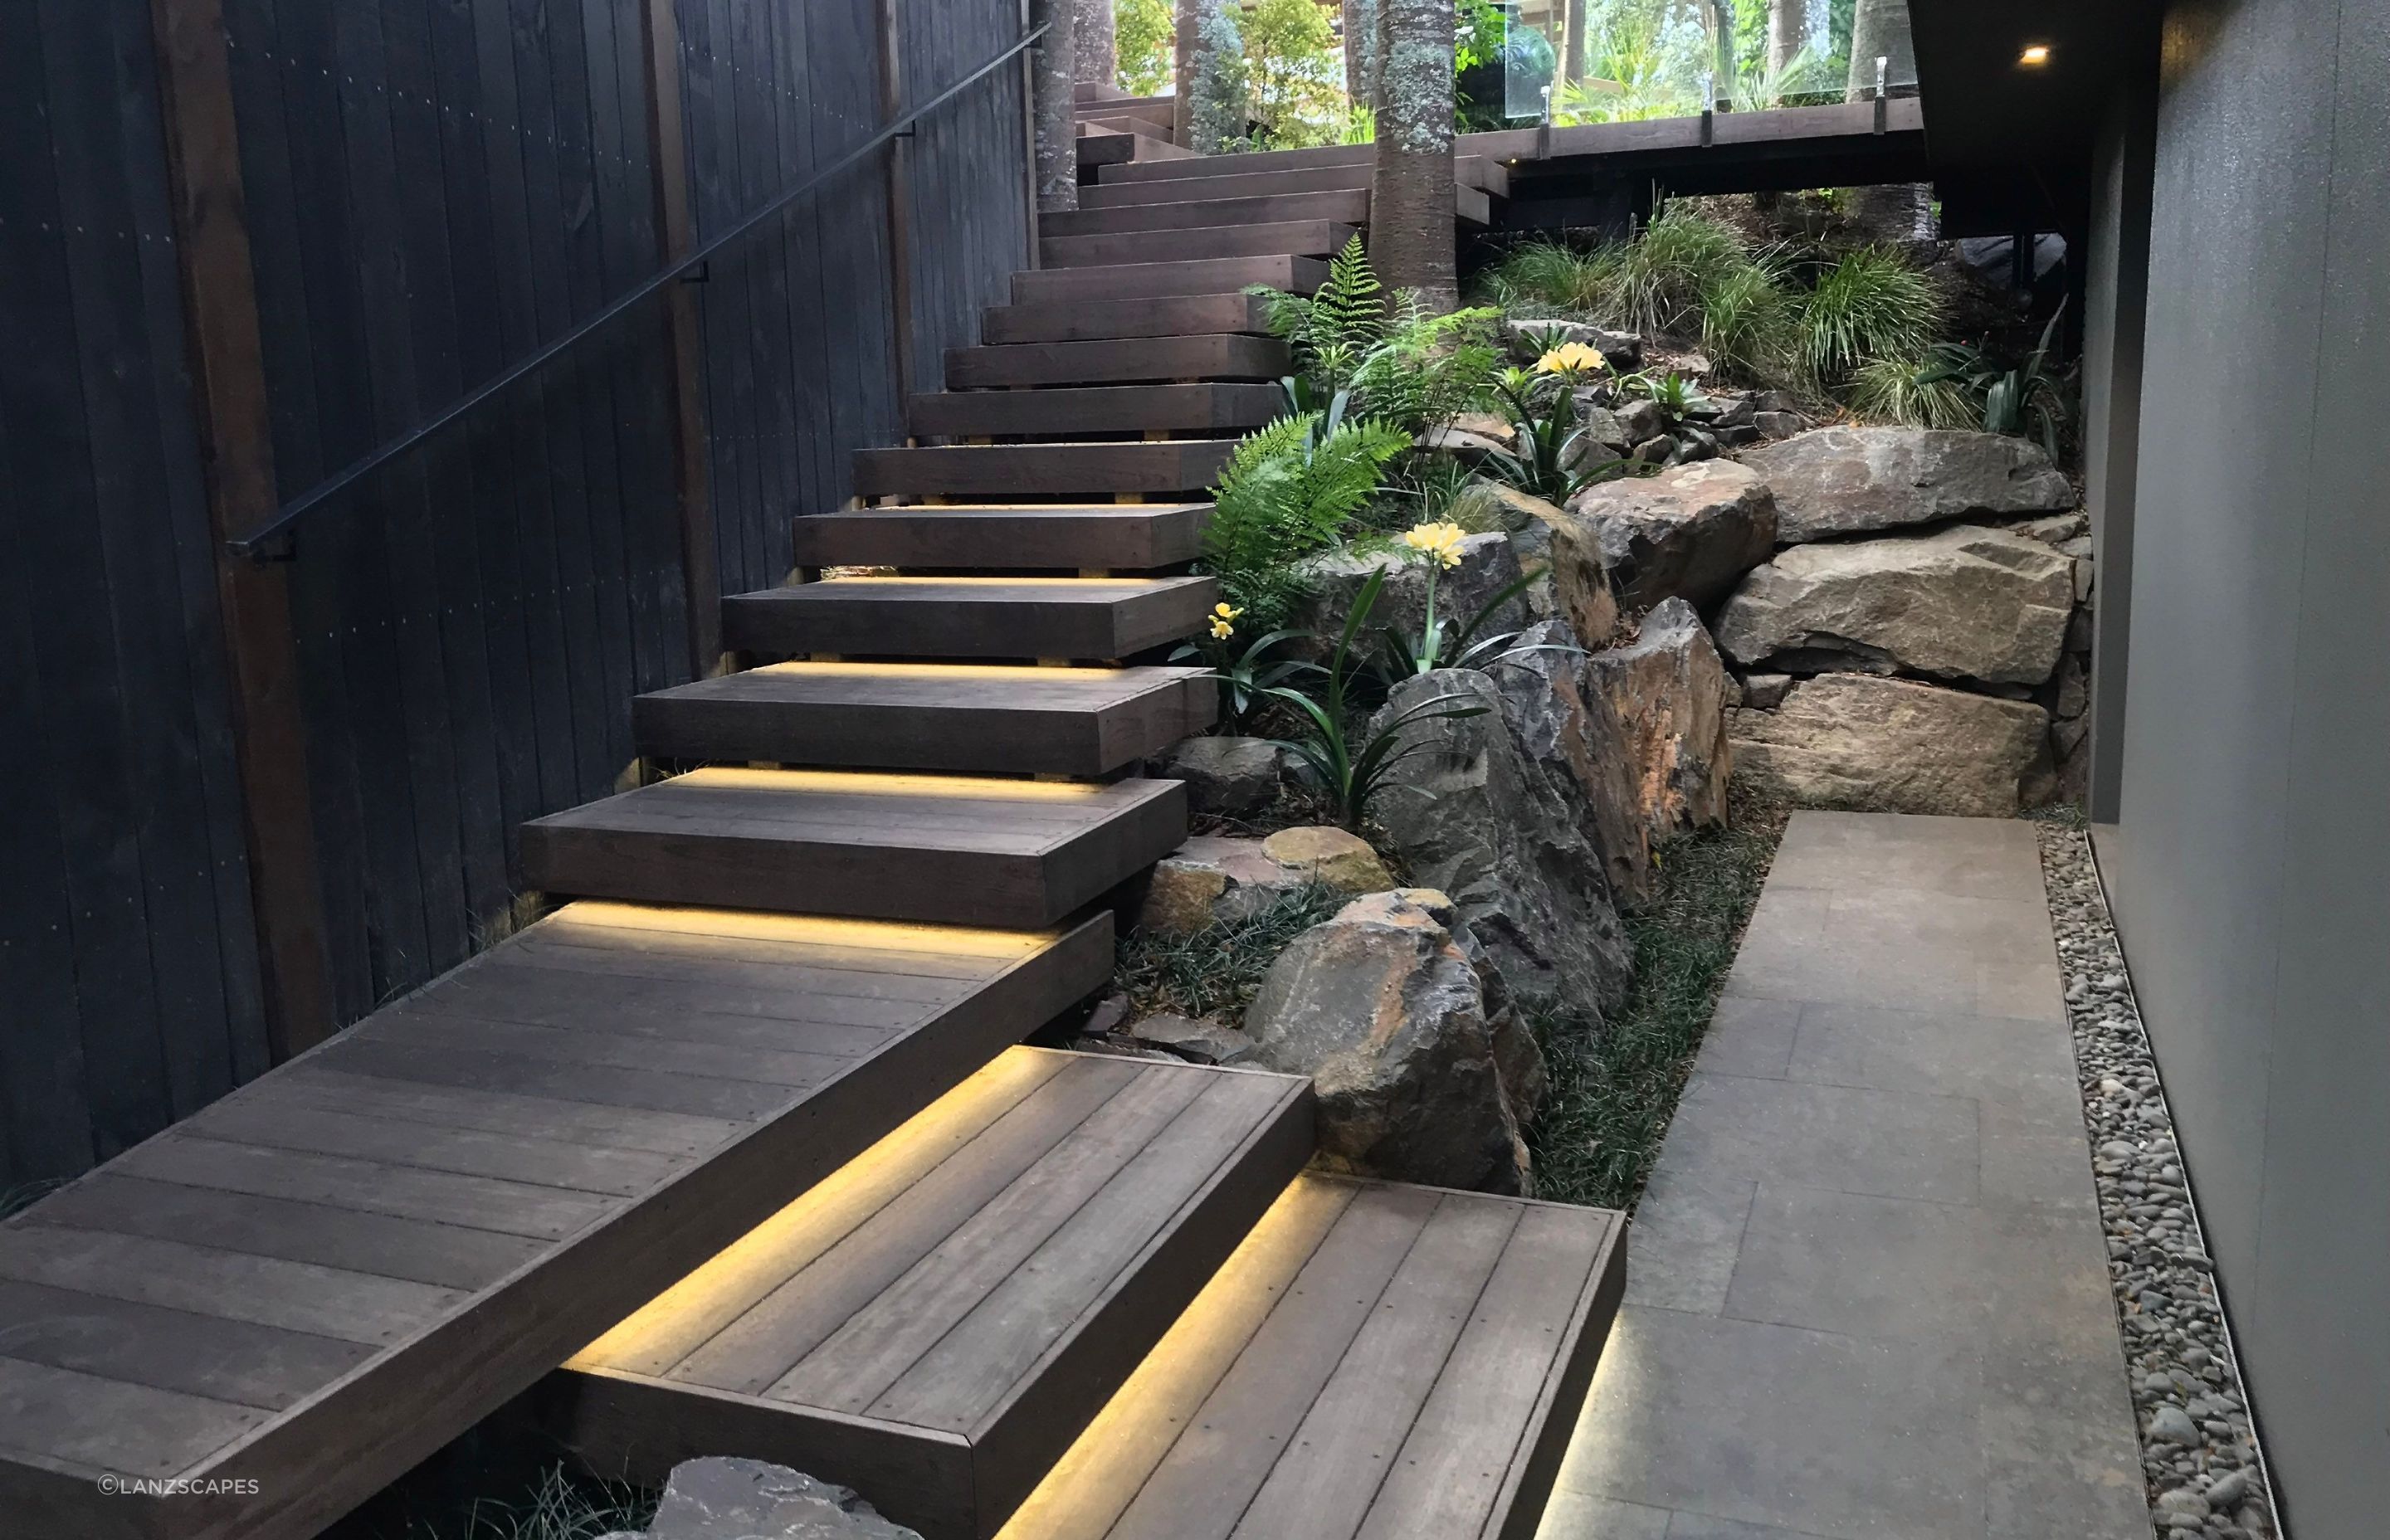 Rock retaining, floating hardwood stairs and stone paving with native/subtropical planting theme.